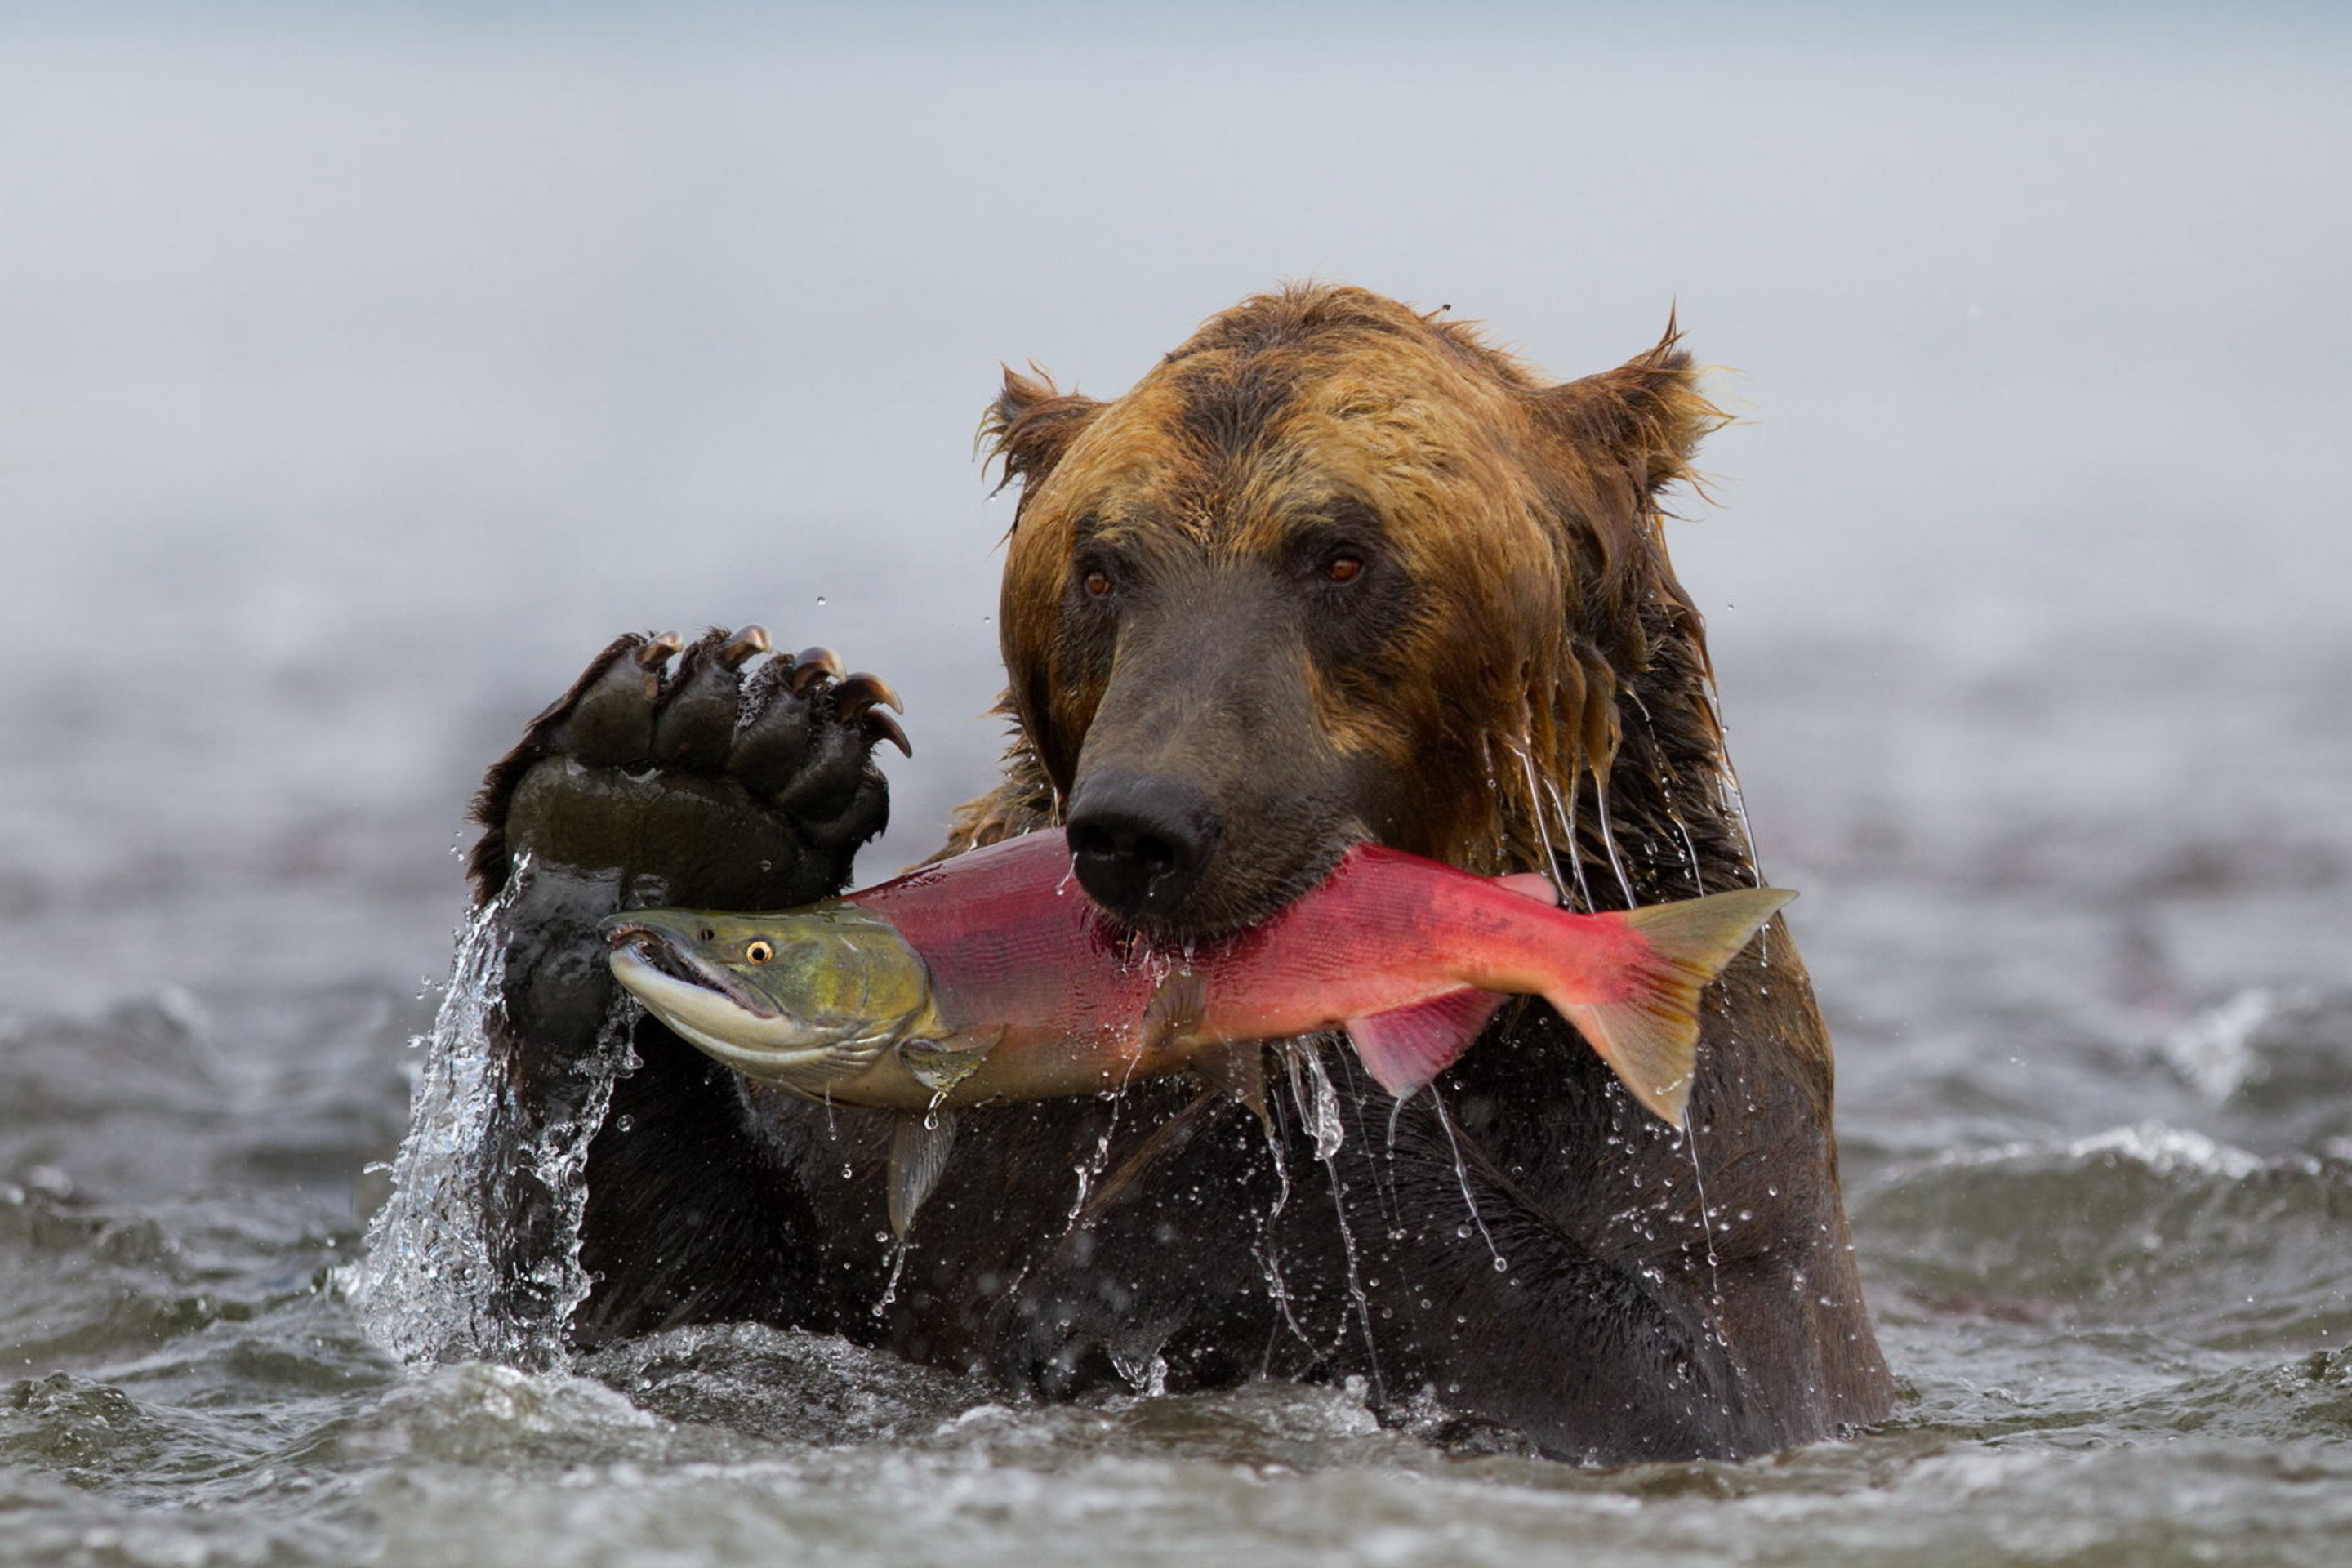 Das Grizzly Bear Catching Fish Wallpaper 2880x1920